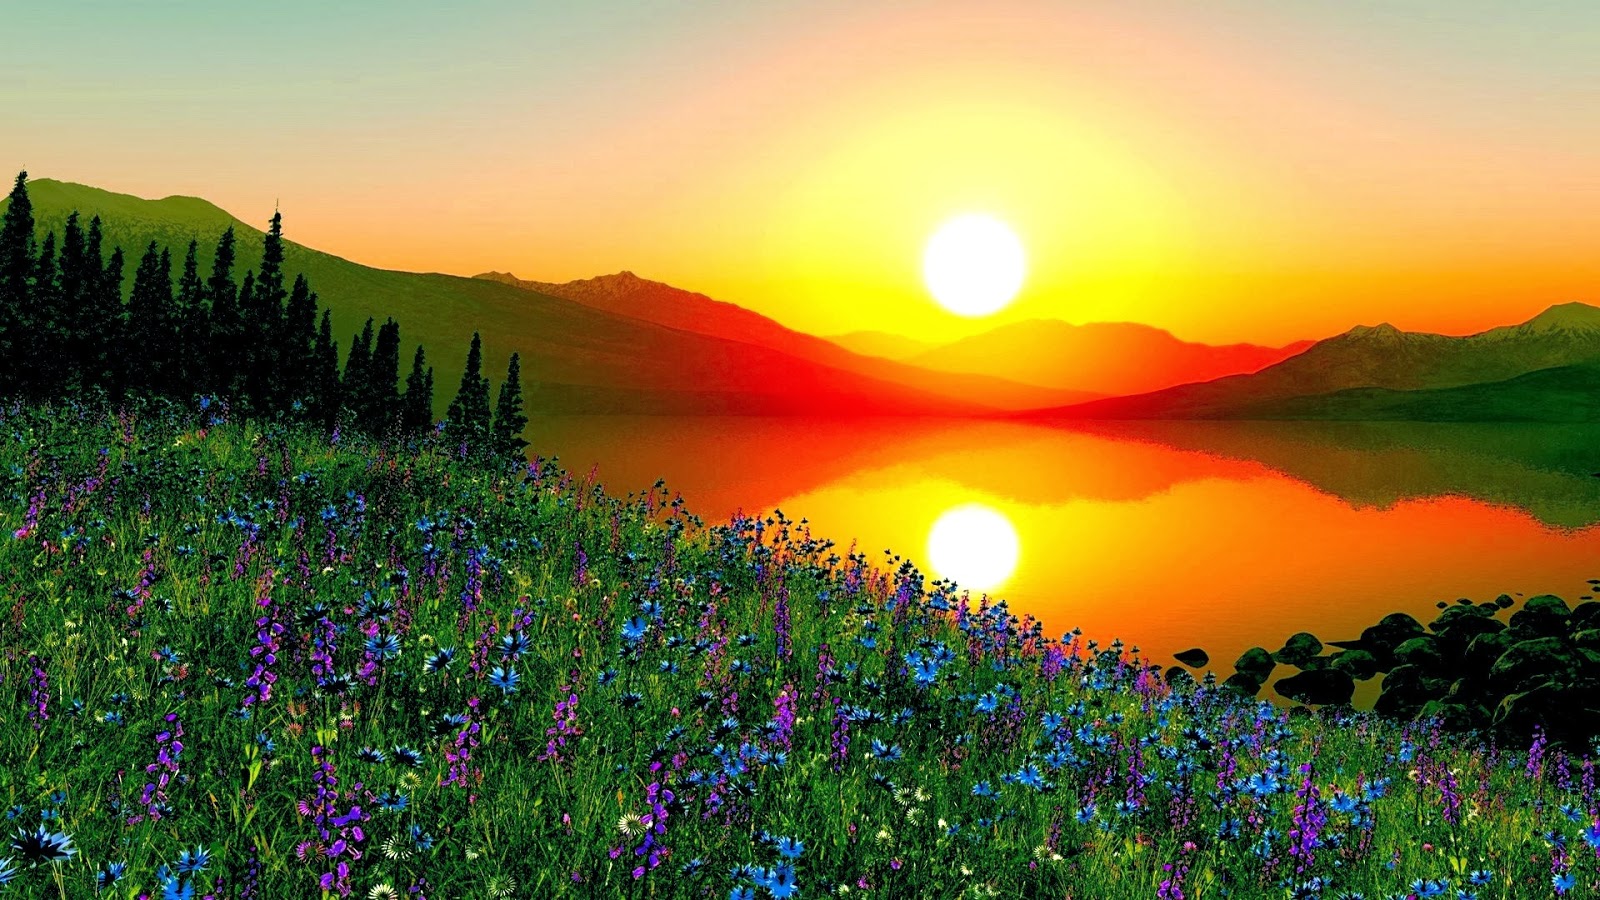 Most Beautiful Sunrise in The World - wallpaper.